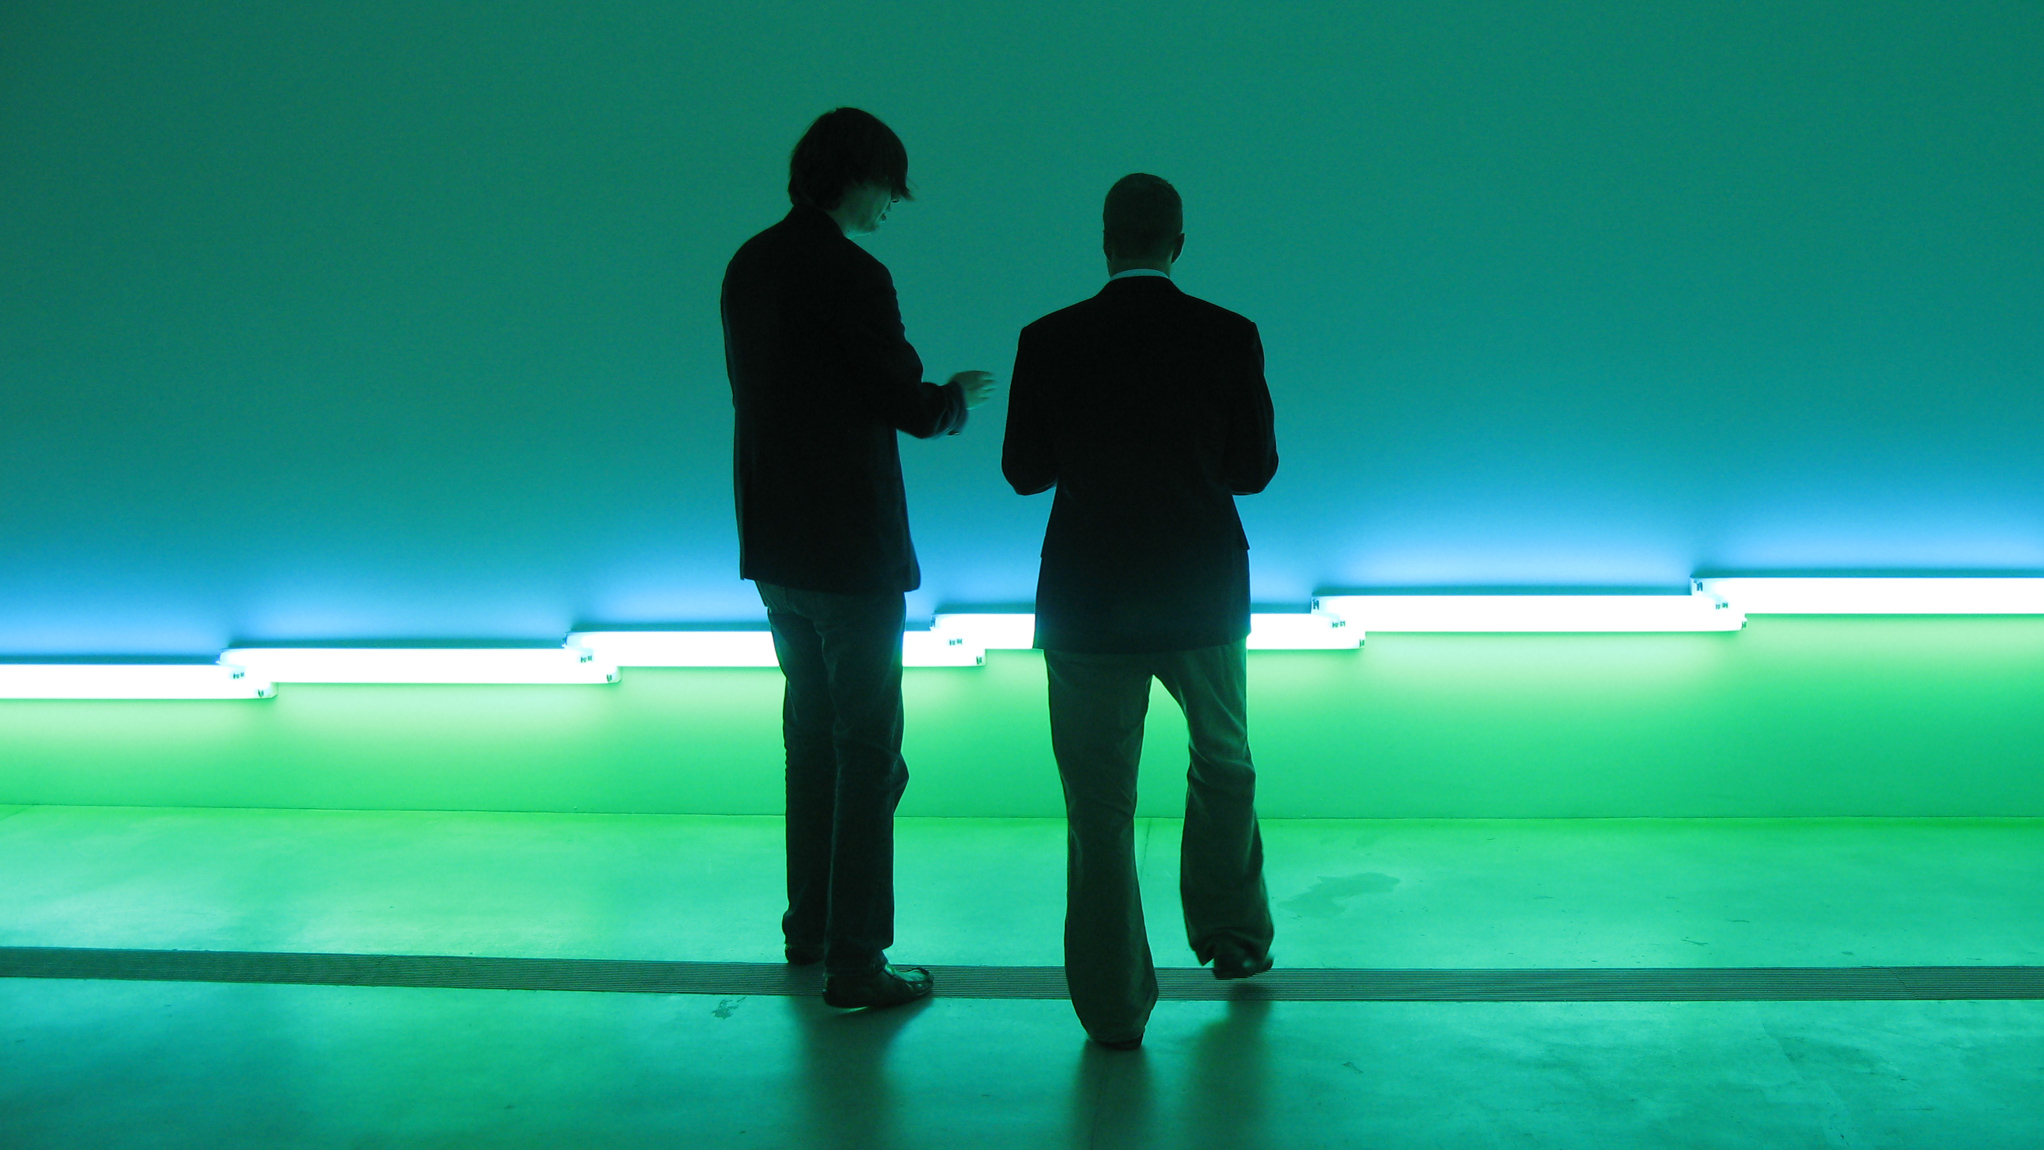 Steven Morse speaks to a professor about Flavin's glowing blue and green installation 